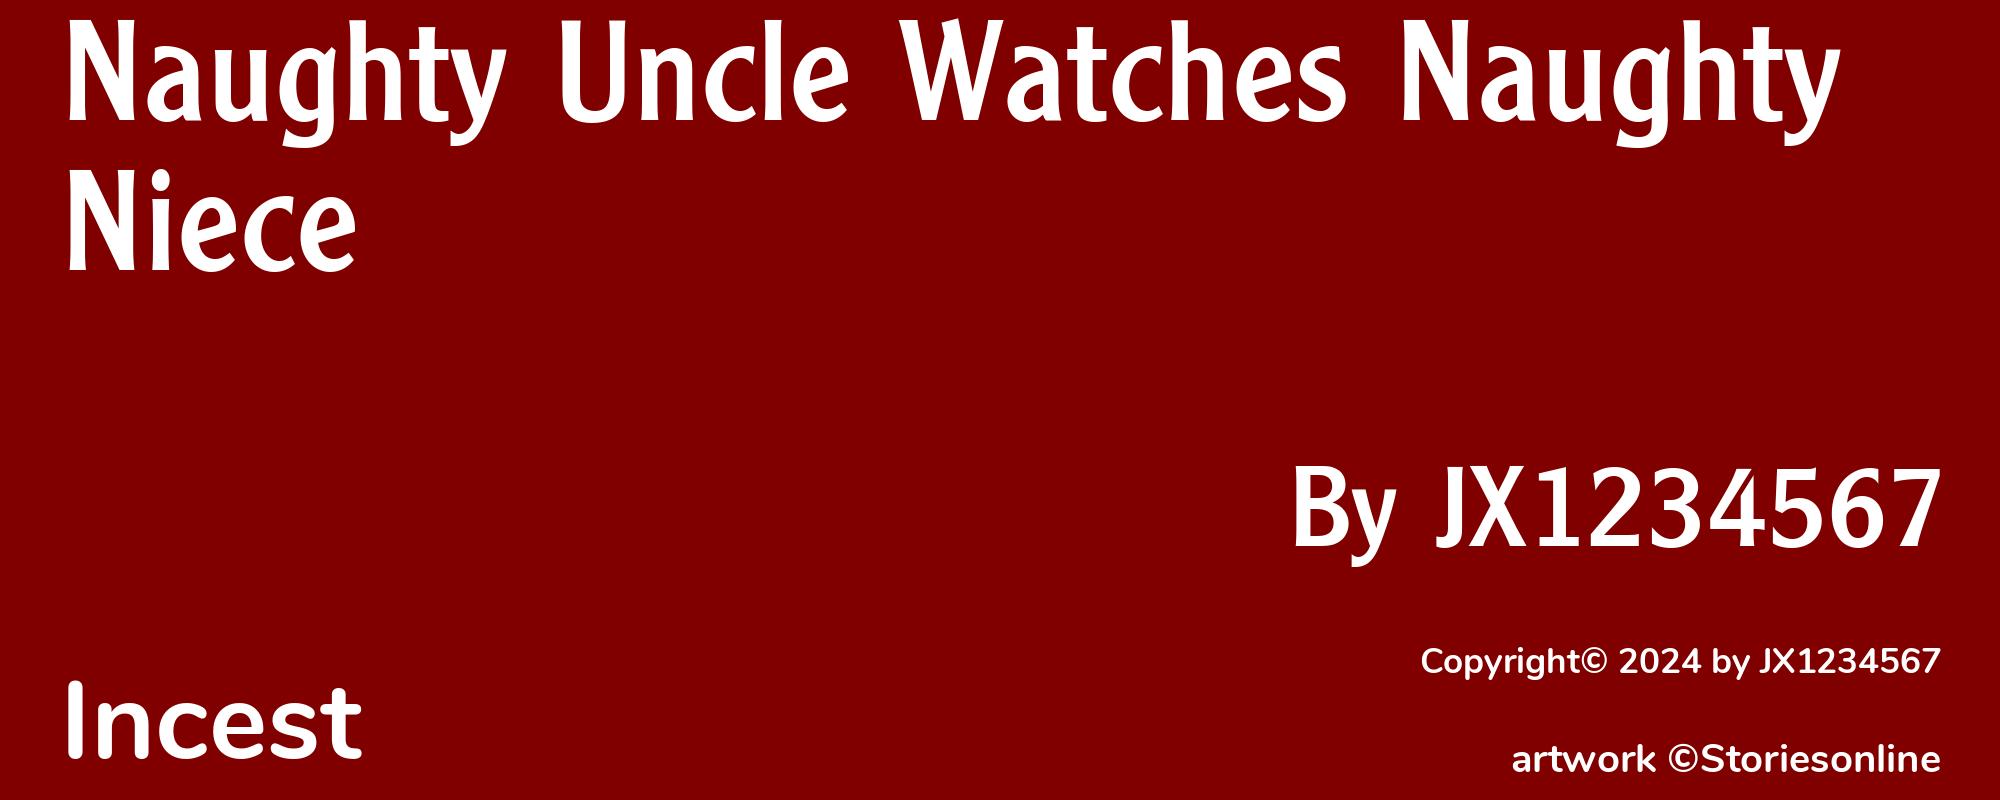 Naughty Uncle Watches Naughty Niece - Cover